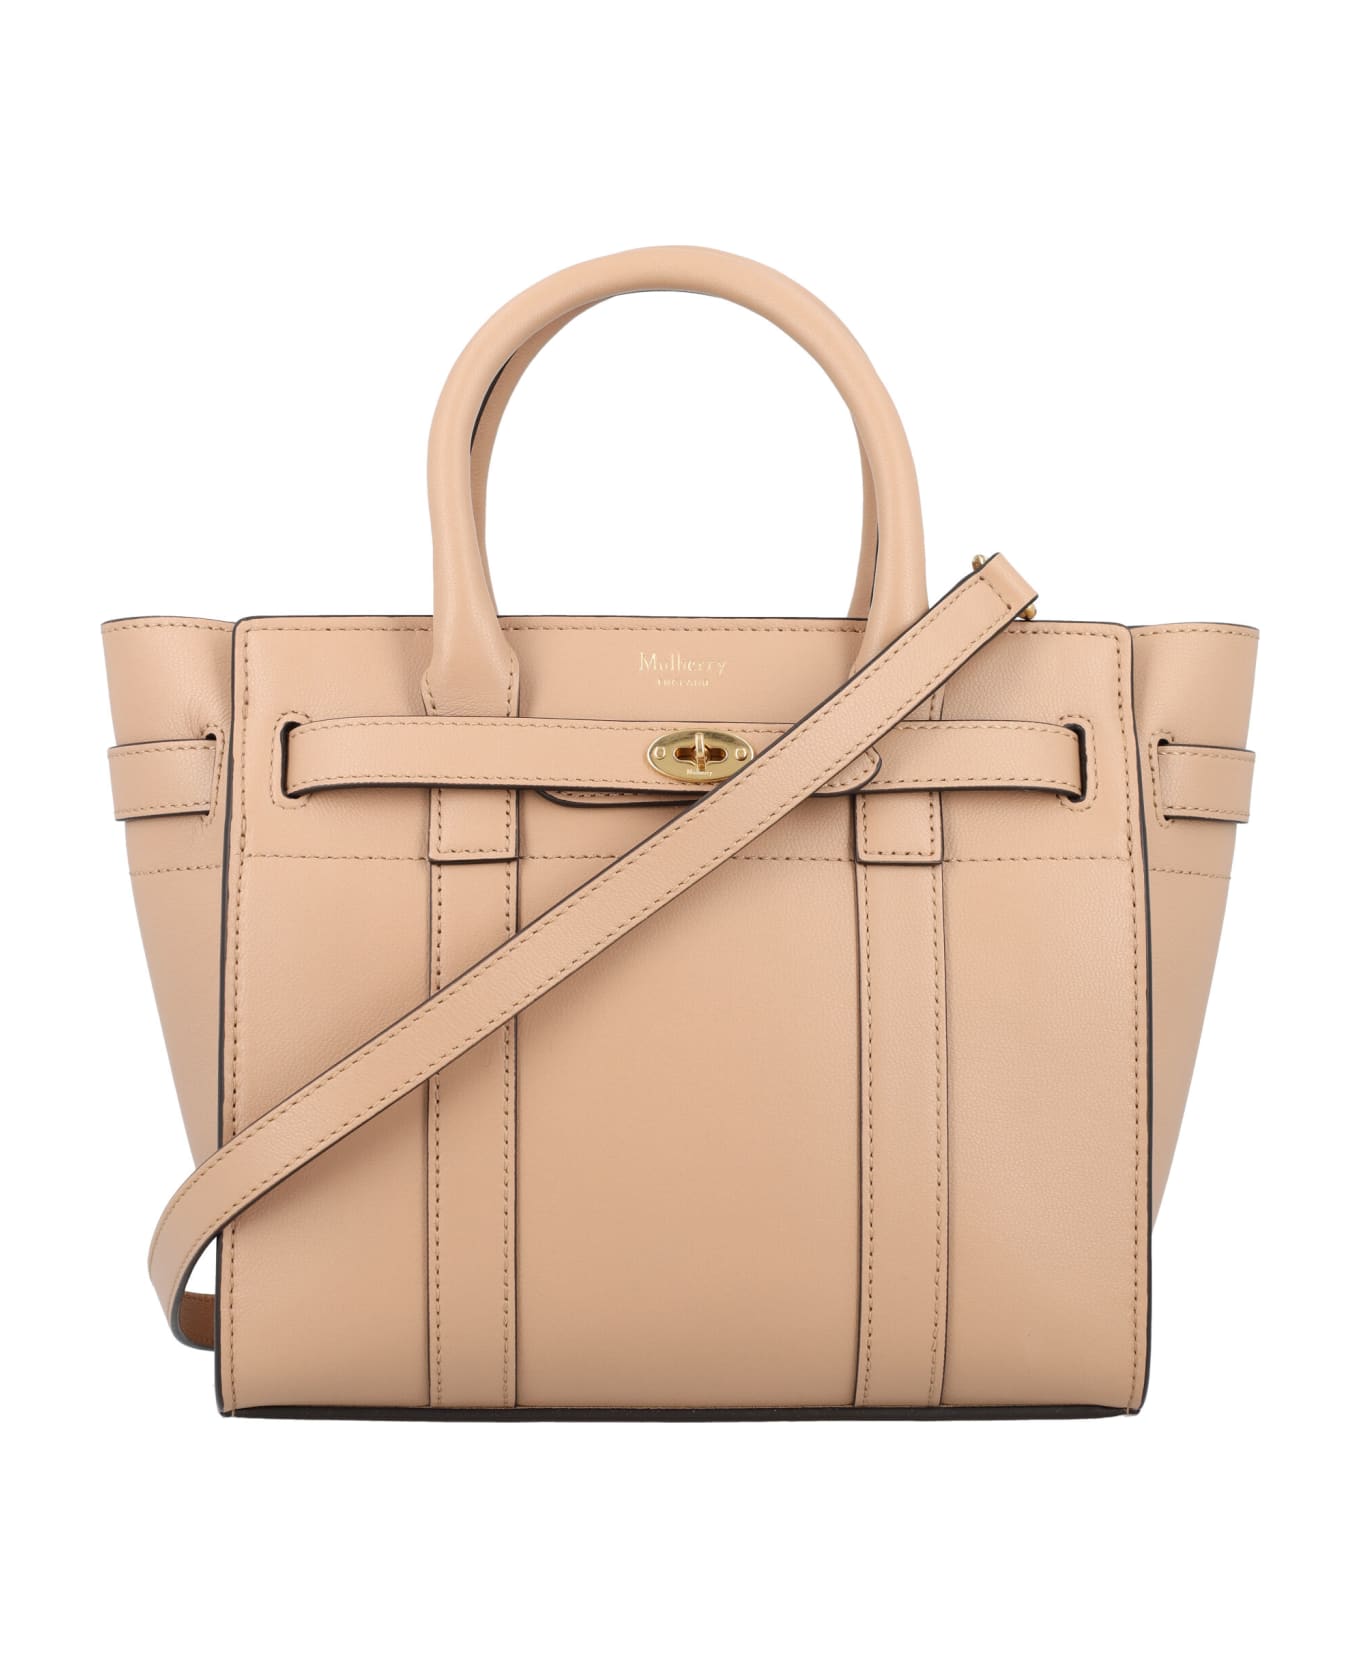 Mulberry Mini Zipped Bayswater Bag - MAPLE